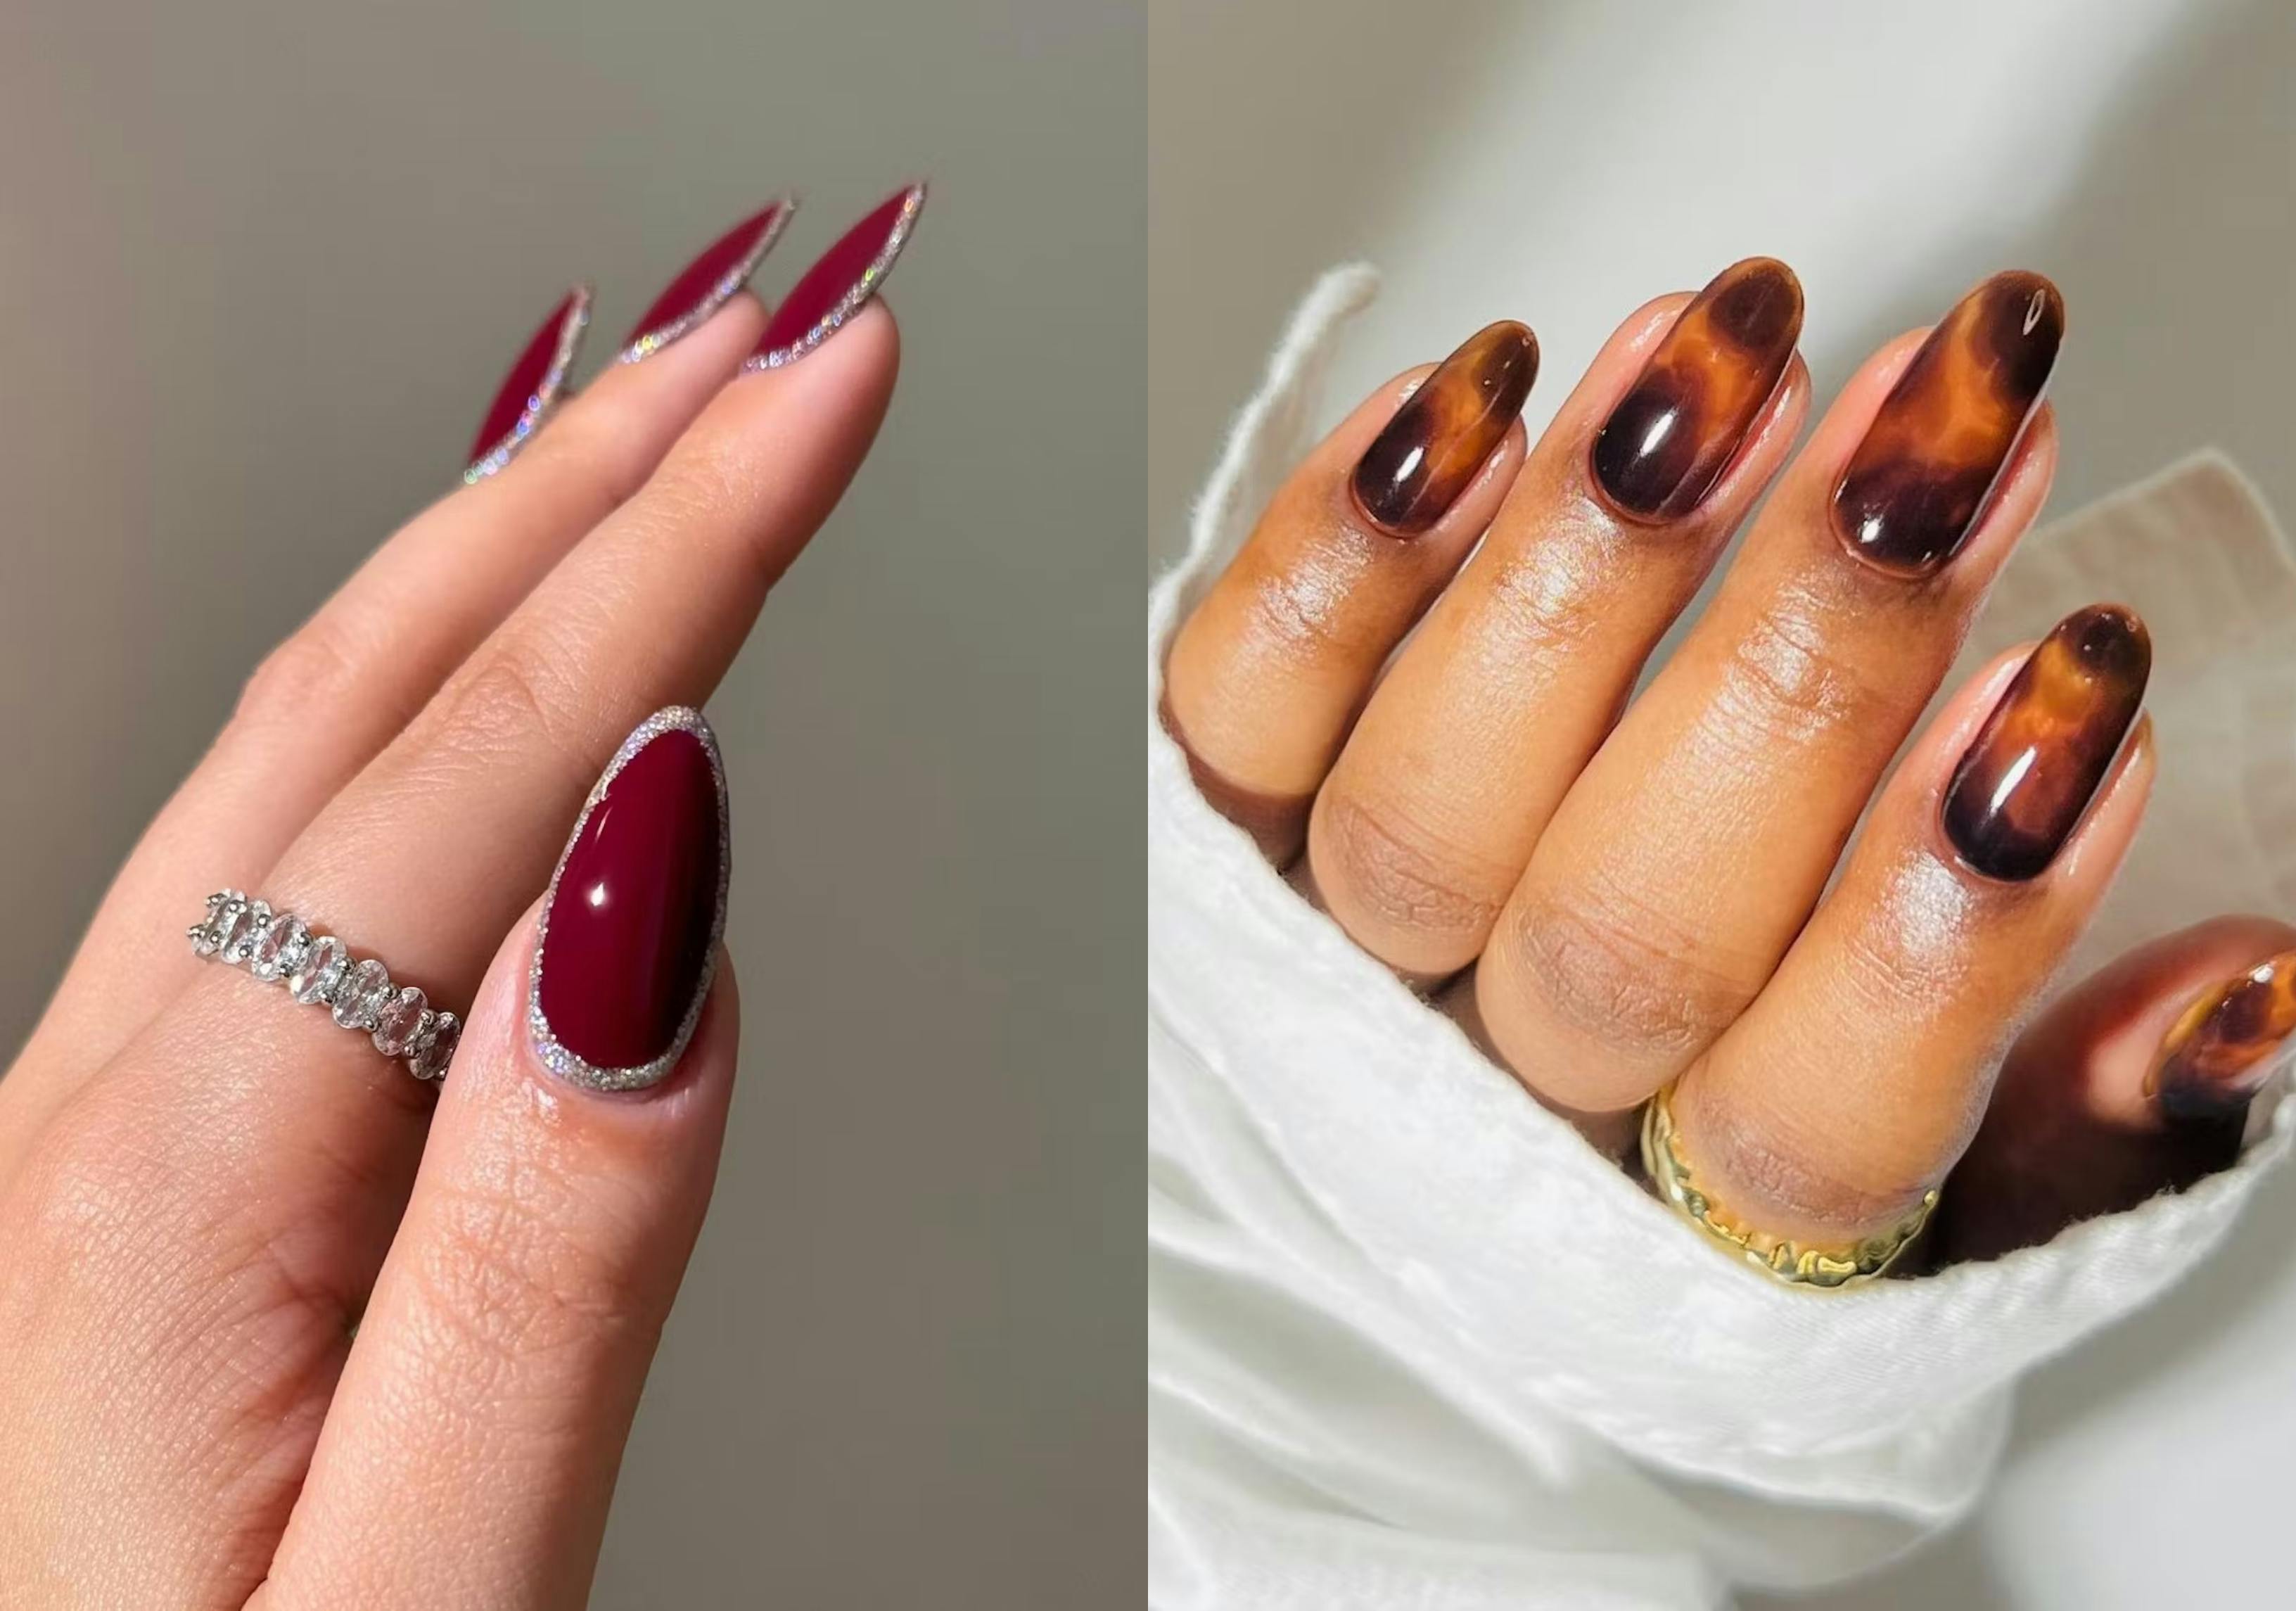 12 Best “Mob Wife” Aesthetic Inspired Manicures For Your Claws